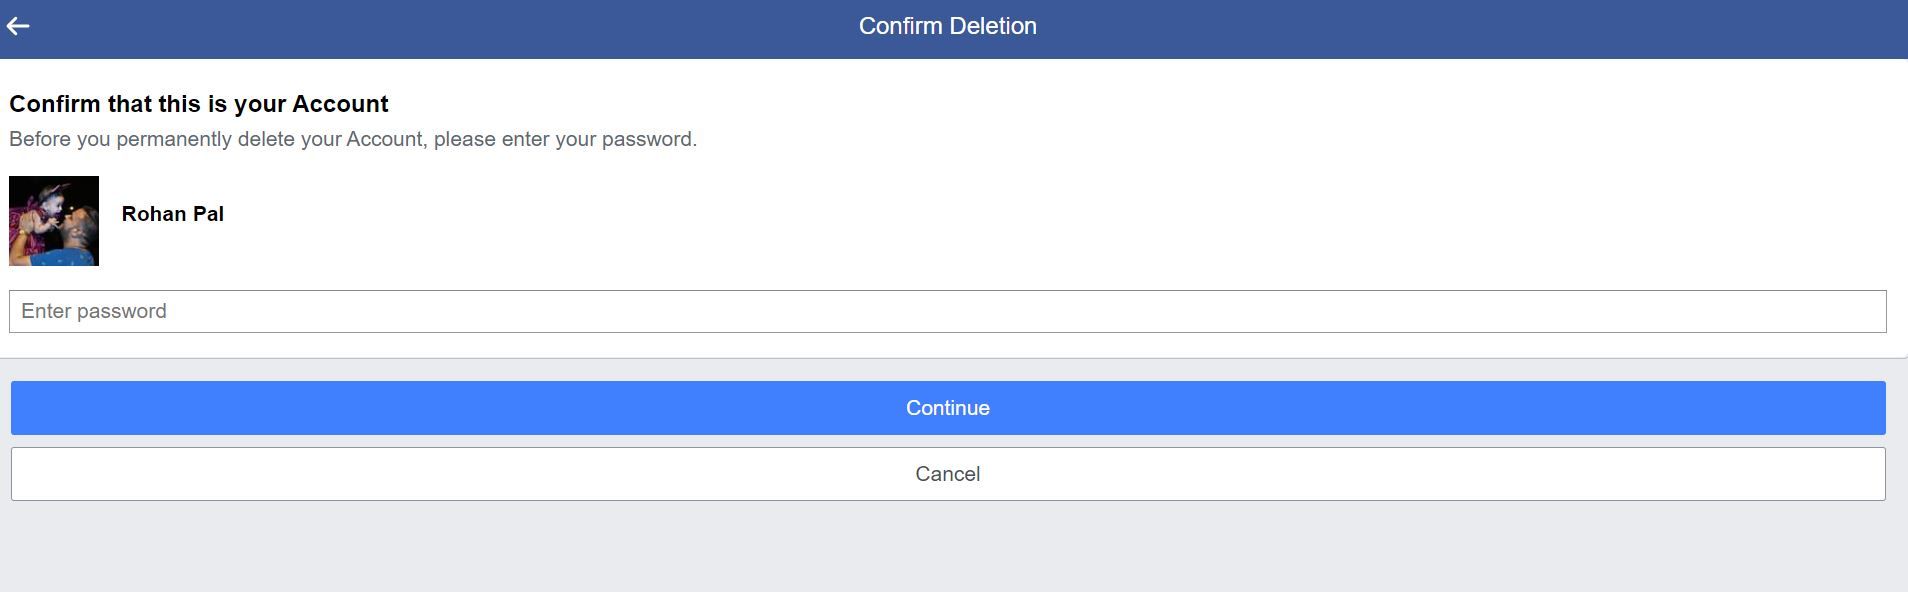 how to deactivate facebook account permanently step by step